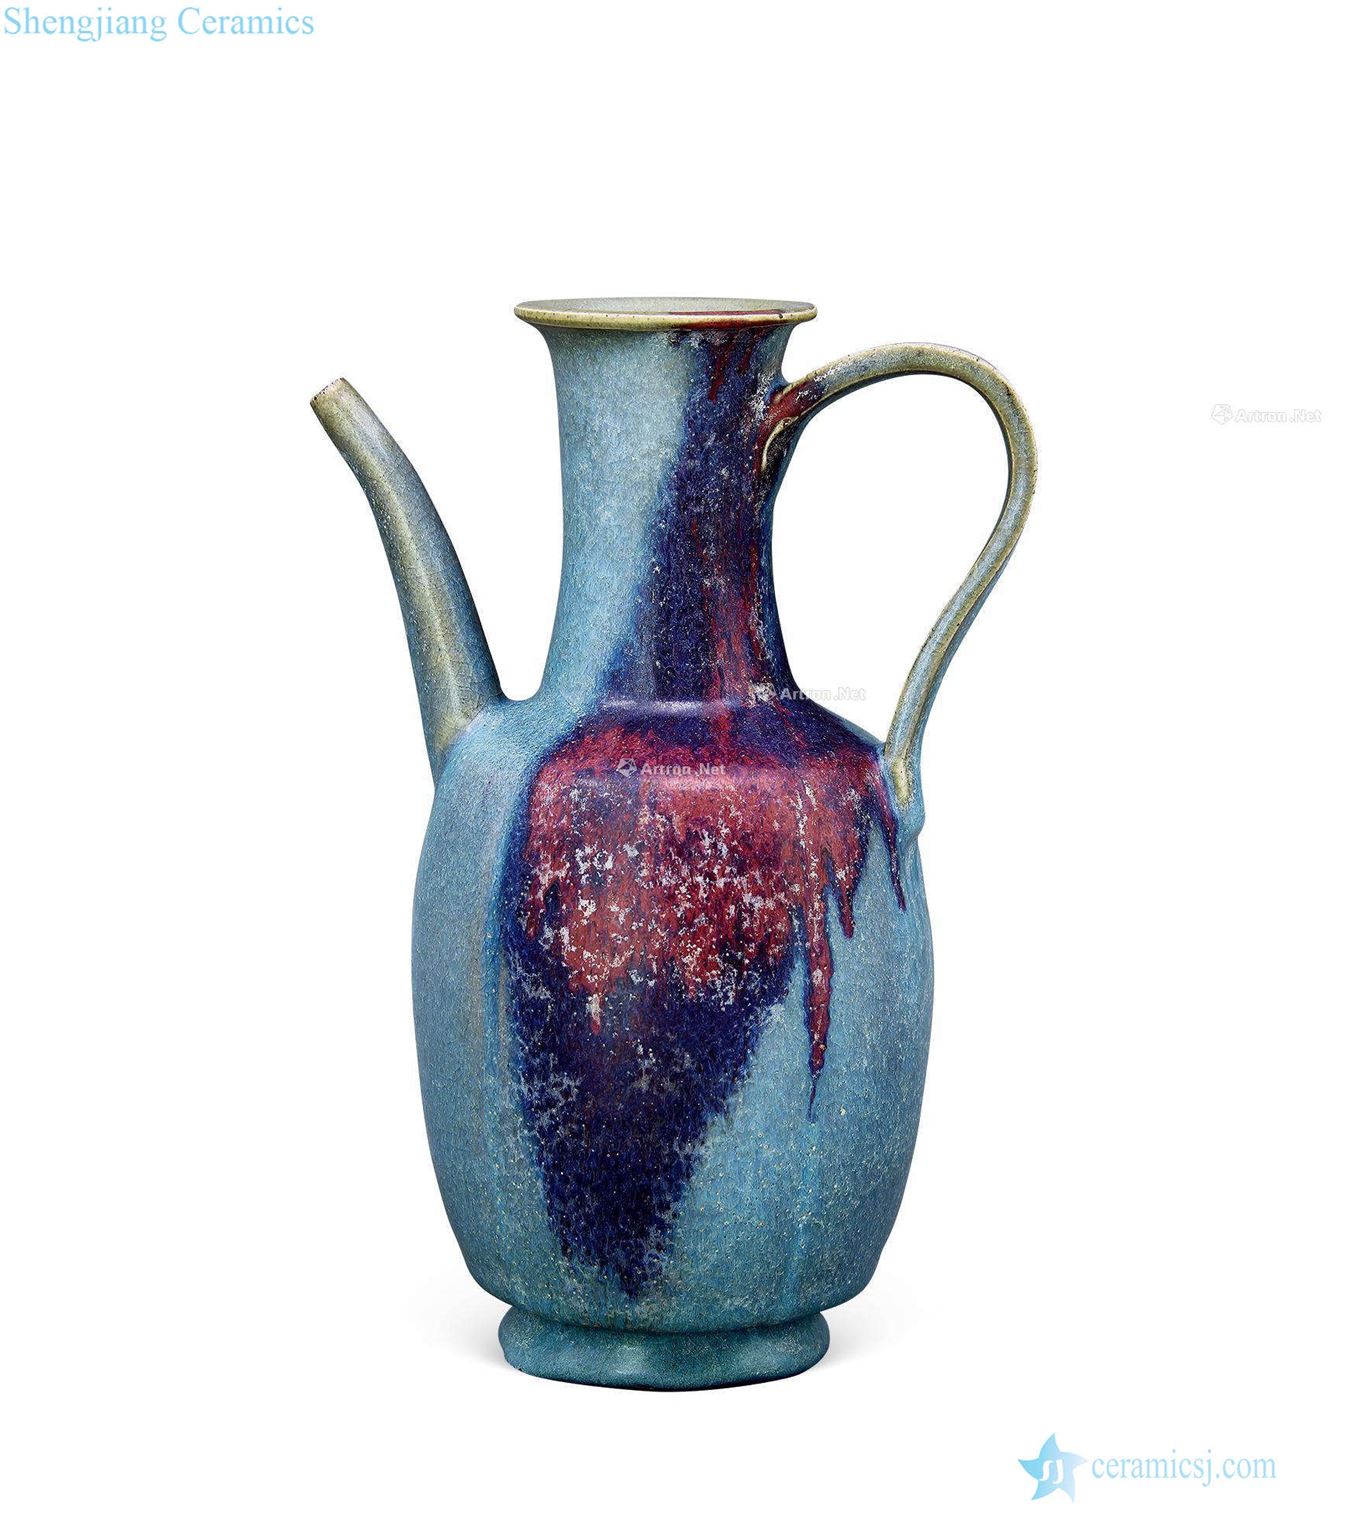 The southern song dynasty purple spot ewer masterpieces